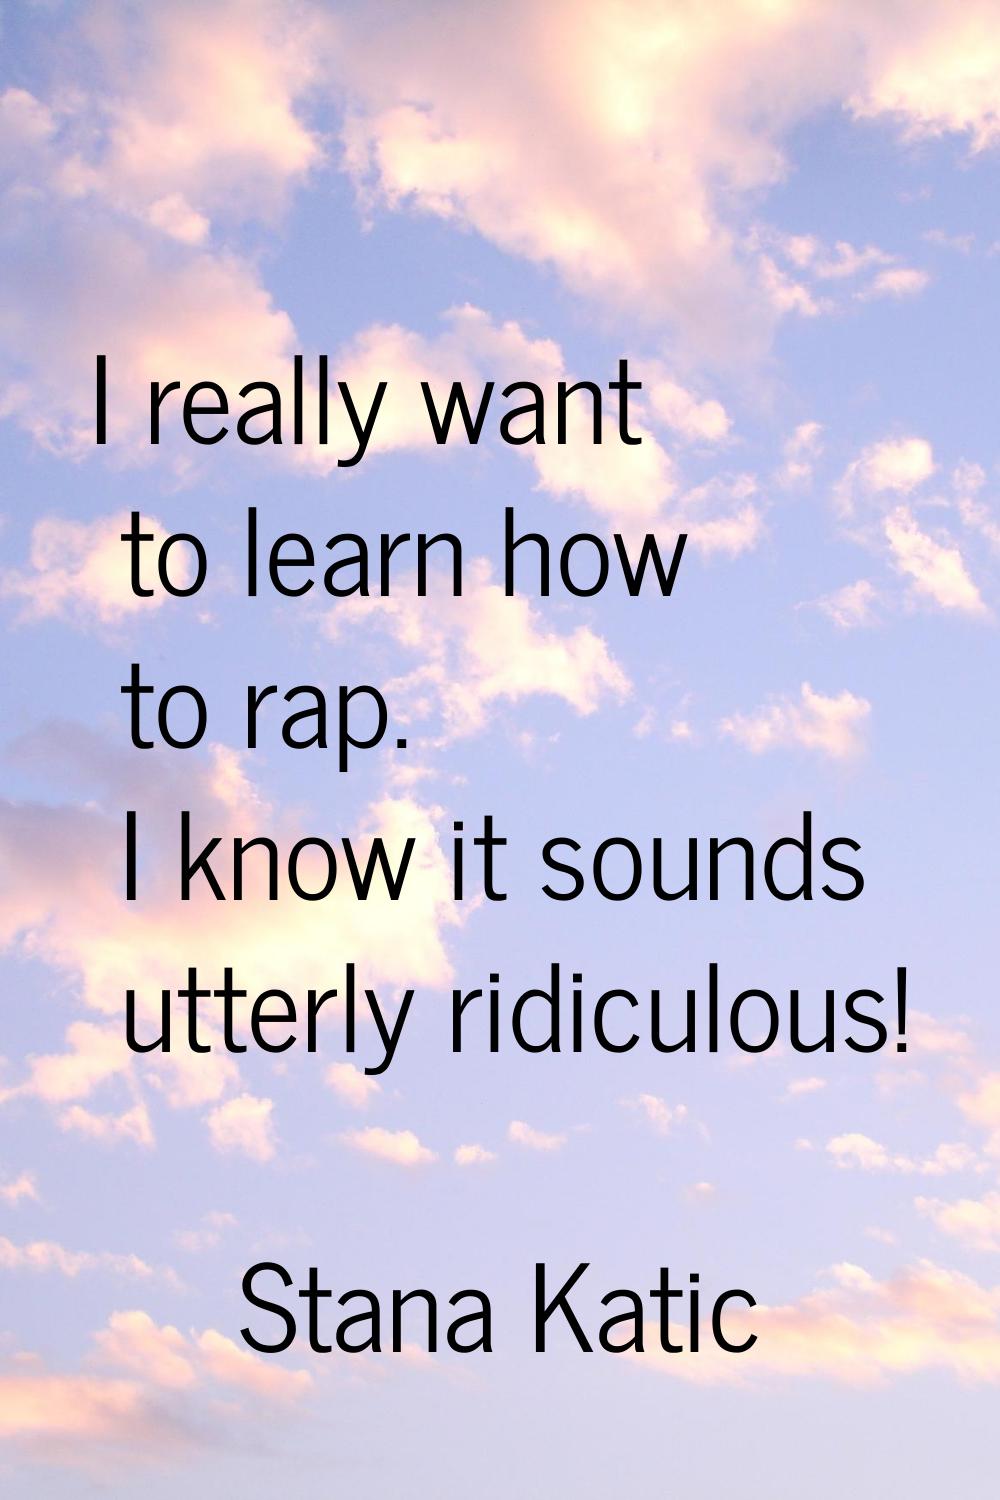 I really want to learn how to rap. I know it sounds utterly ridiculous!